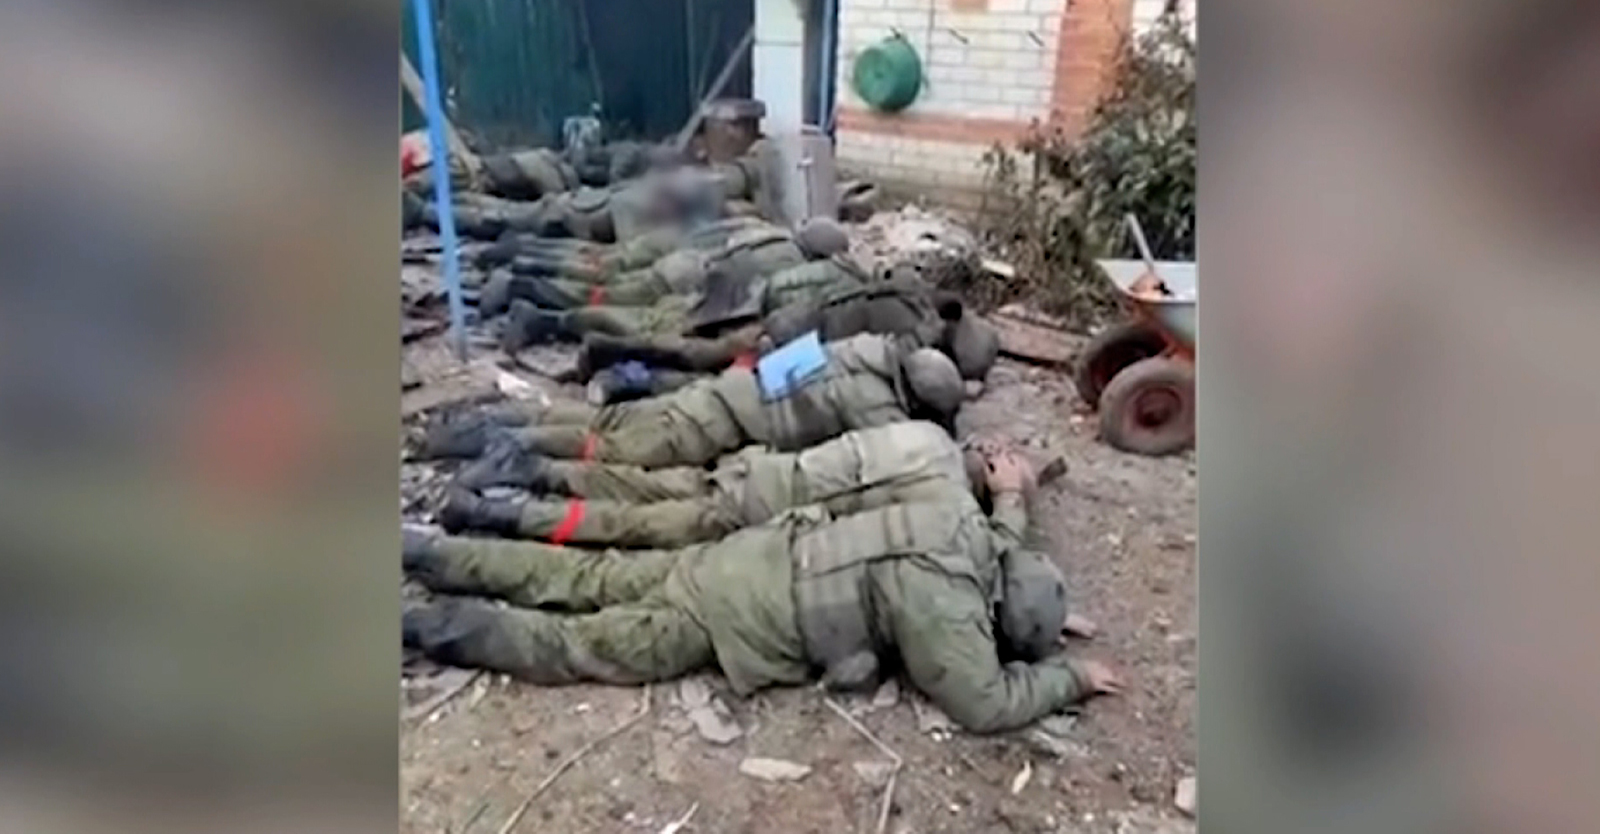 The edited video purports to show captured Russian soldiers in an act of surrender, with several men lying on the ground on their fronts with their hands over their heads. 